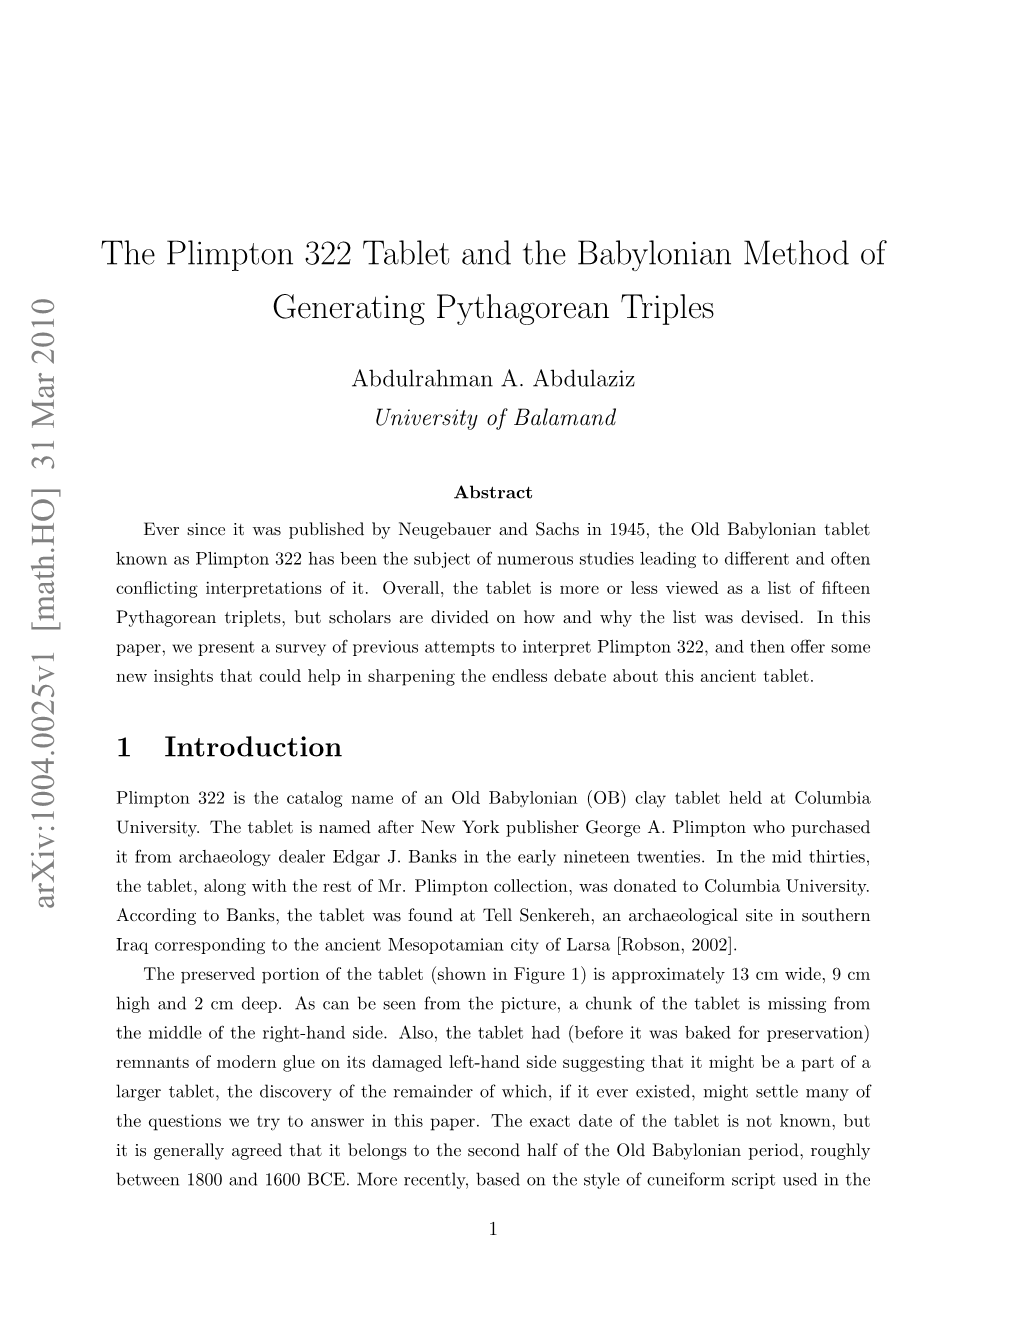 The Plimpton 322 Tablet and the Babylonian Method of Generating